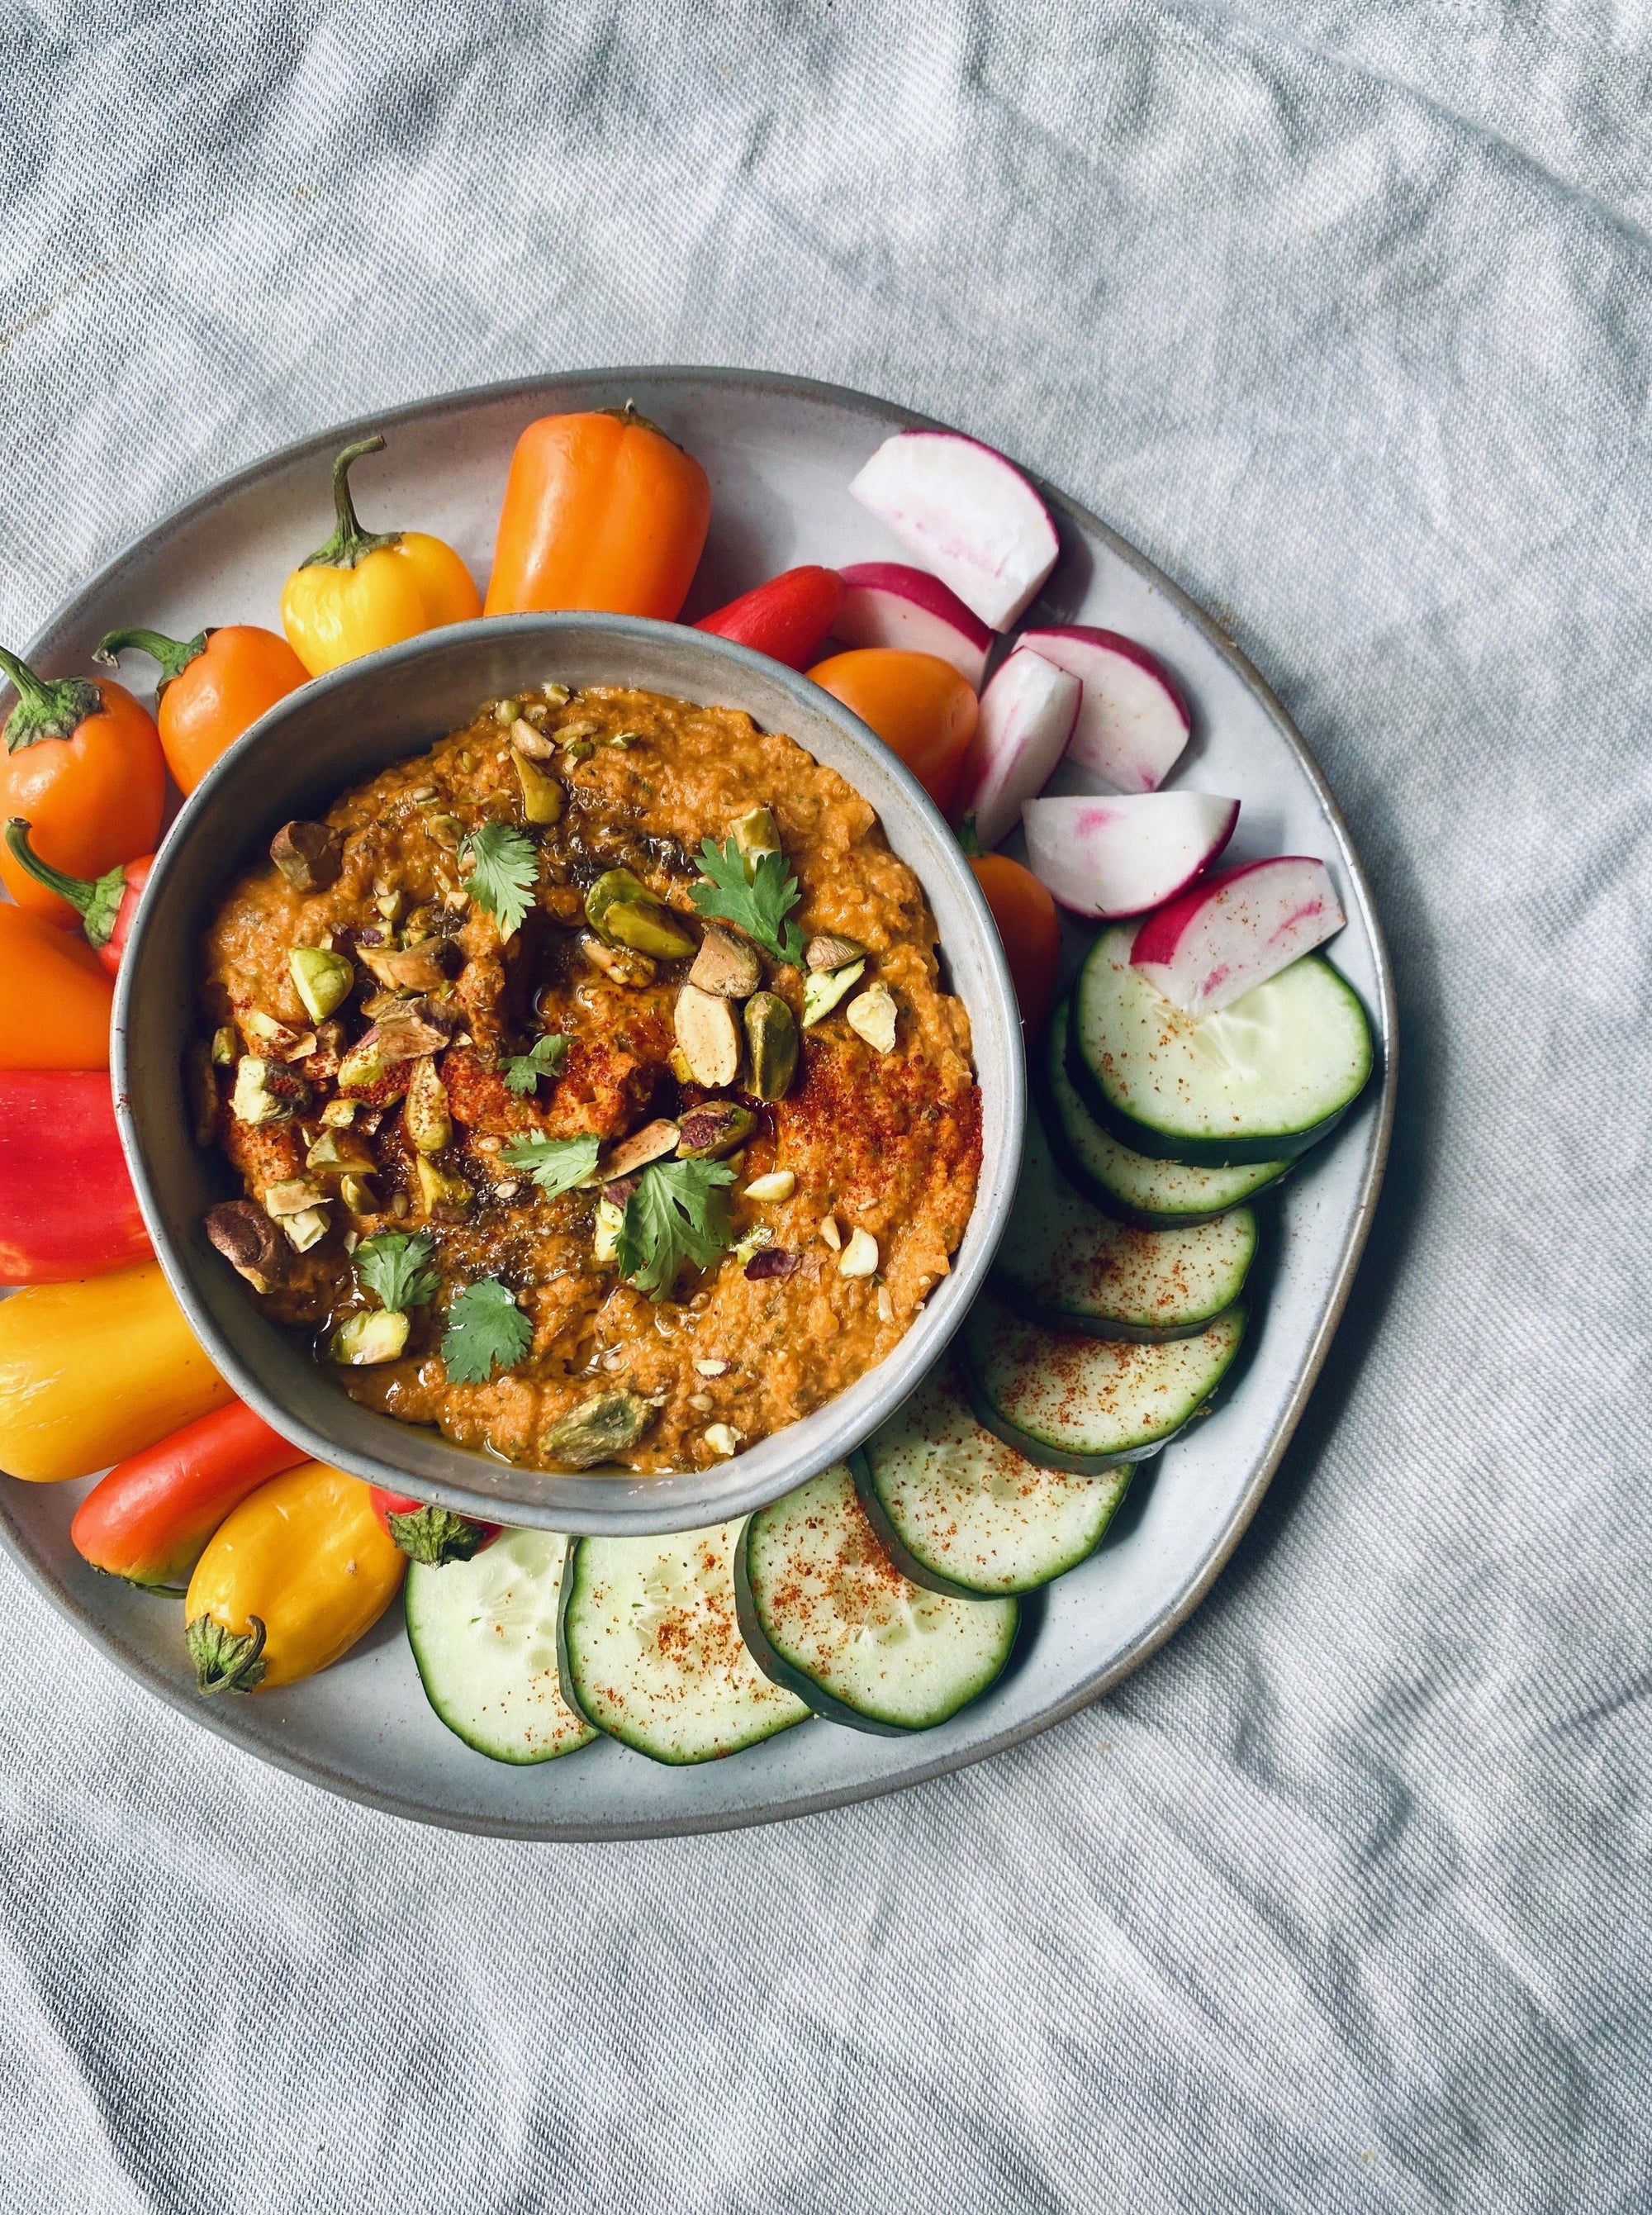 Recipe for Jazzed Up Roasted red Petter Hummus from JOYÀ